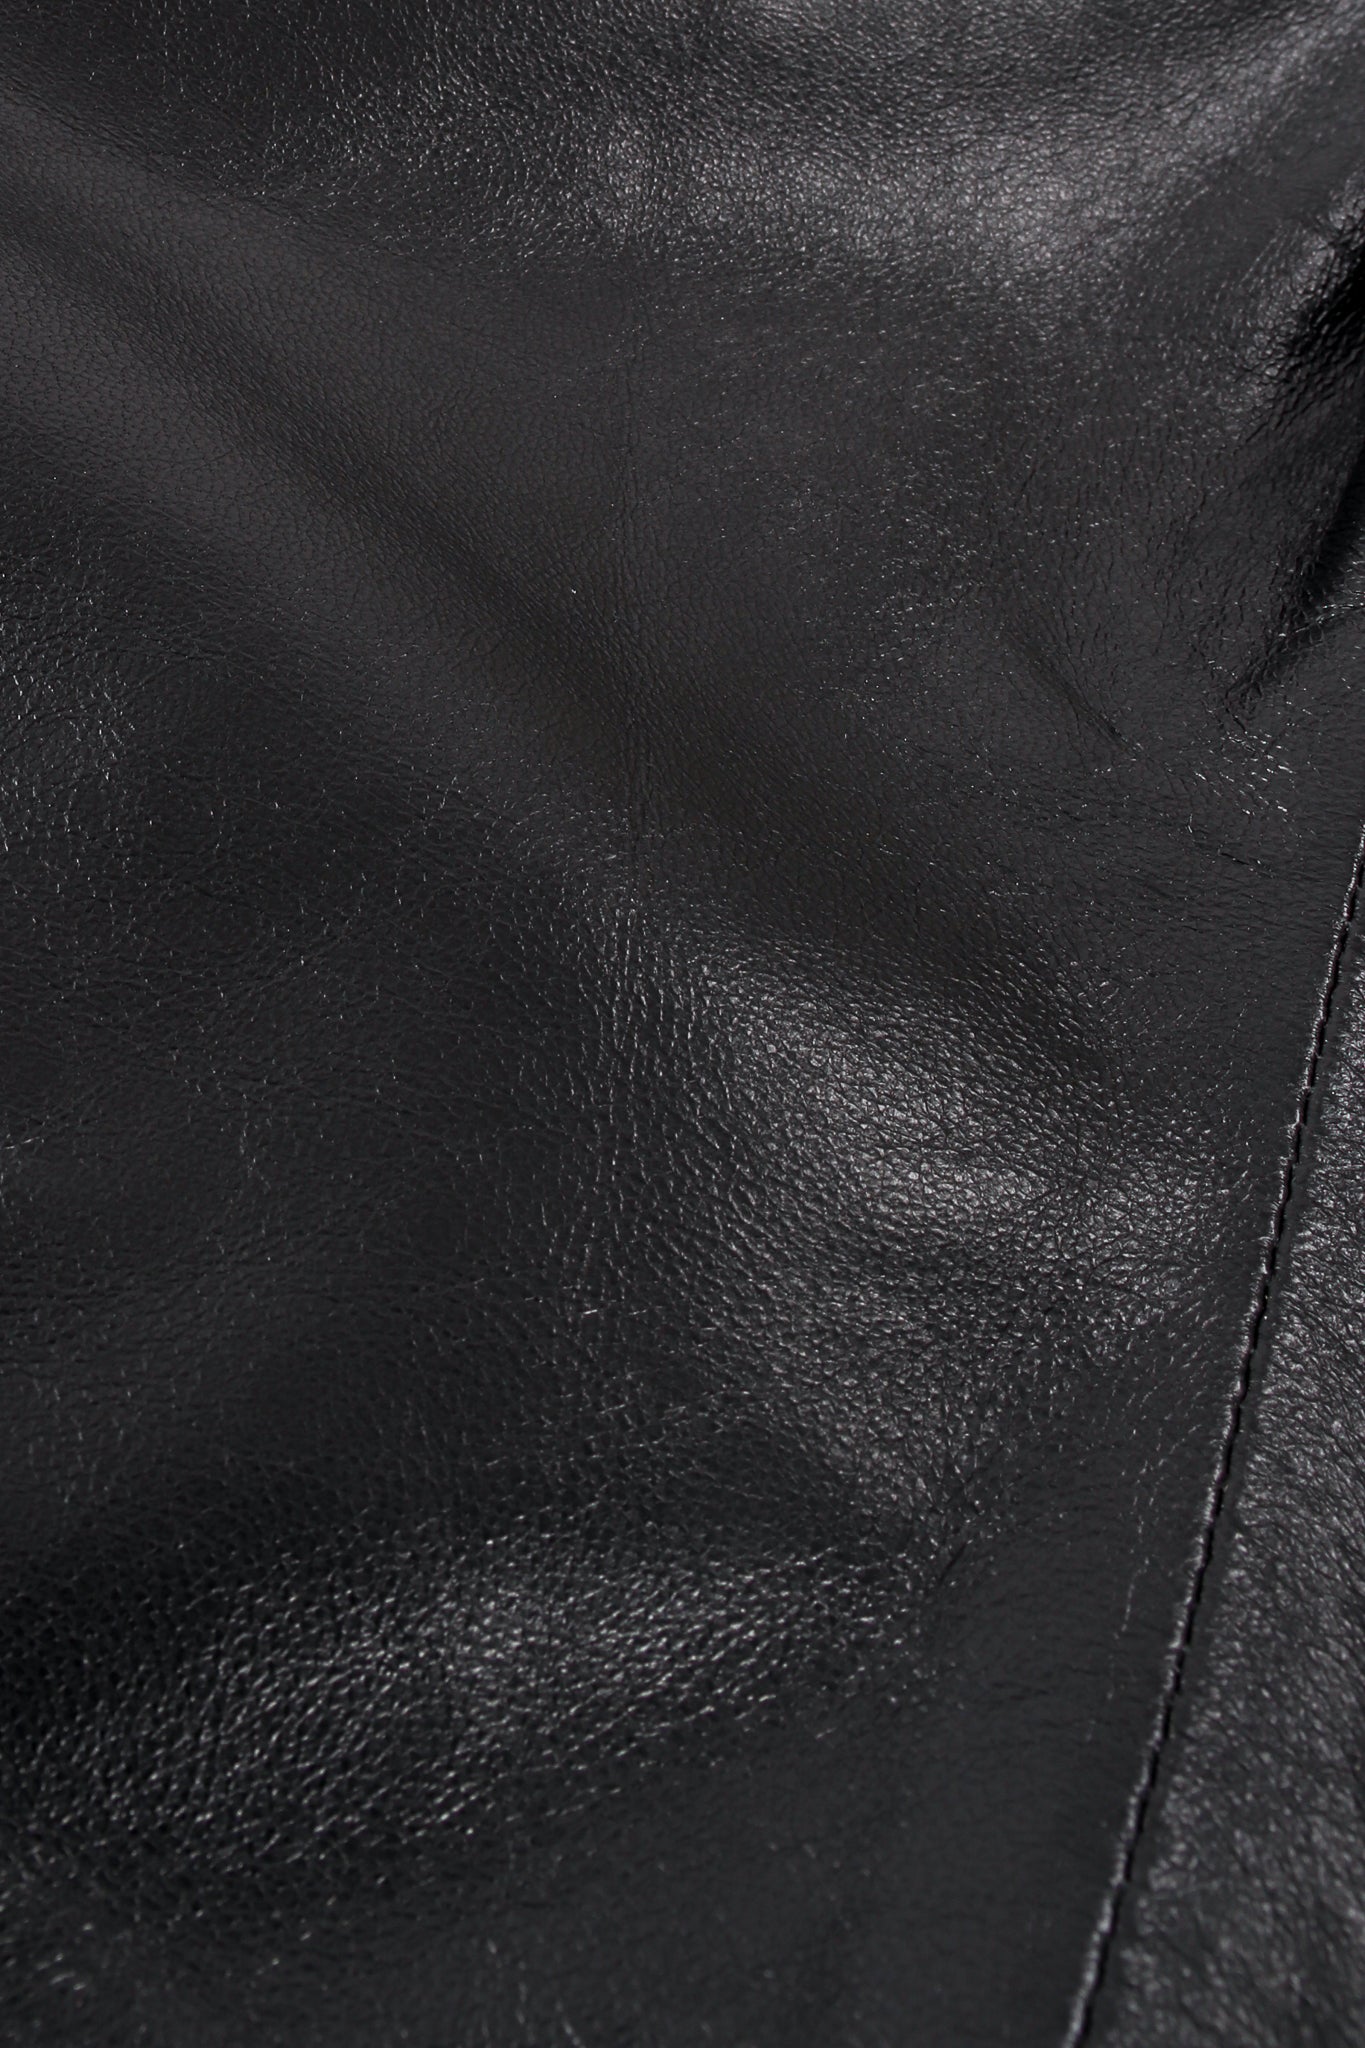 Jitrois Soft Black Leather Balloon Sleeve Bustier leather fabric at Recess Los Angeles